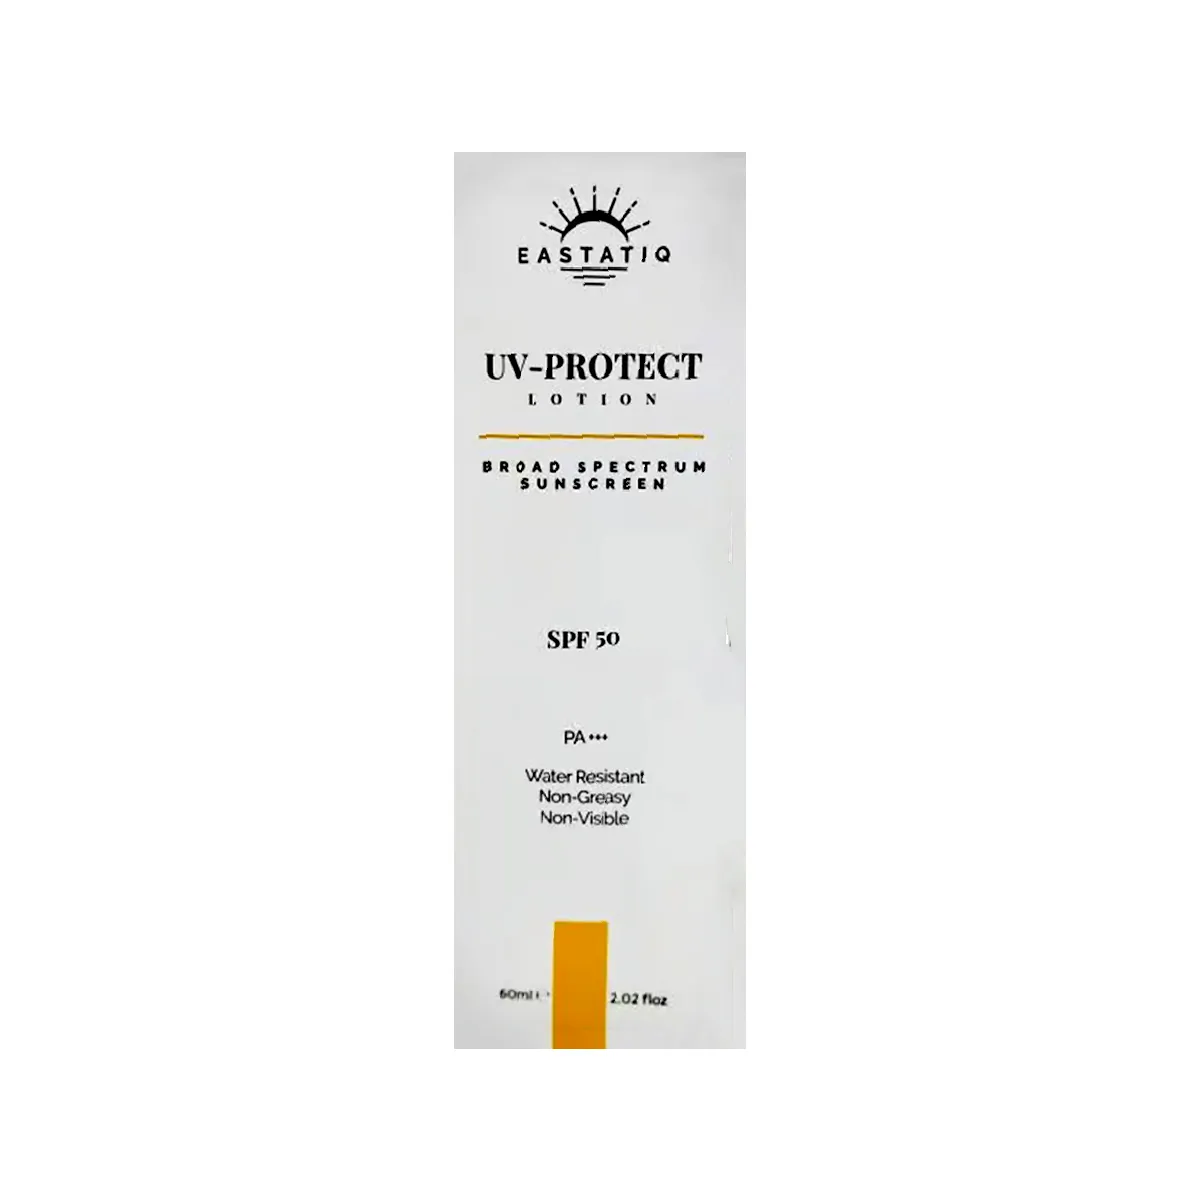 First product image of Eastatiq UV Protect Lotion SPF 50 60ml